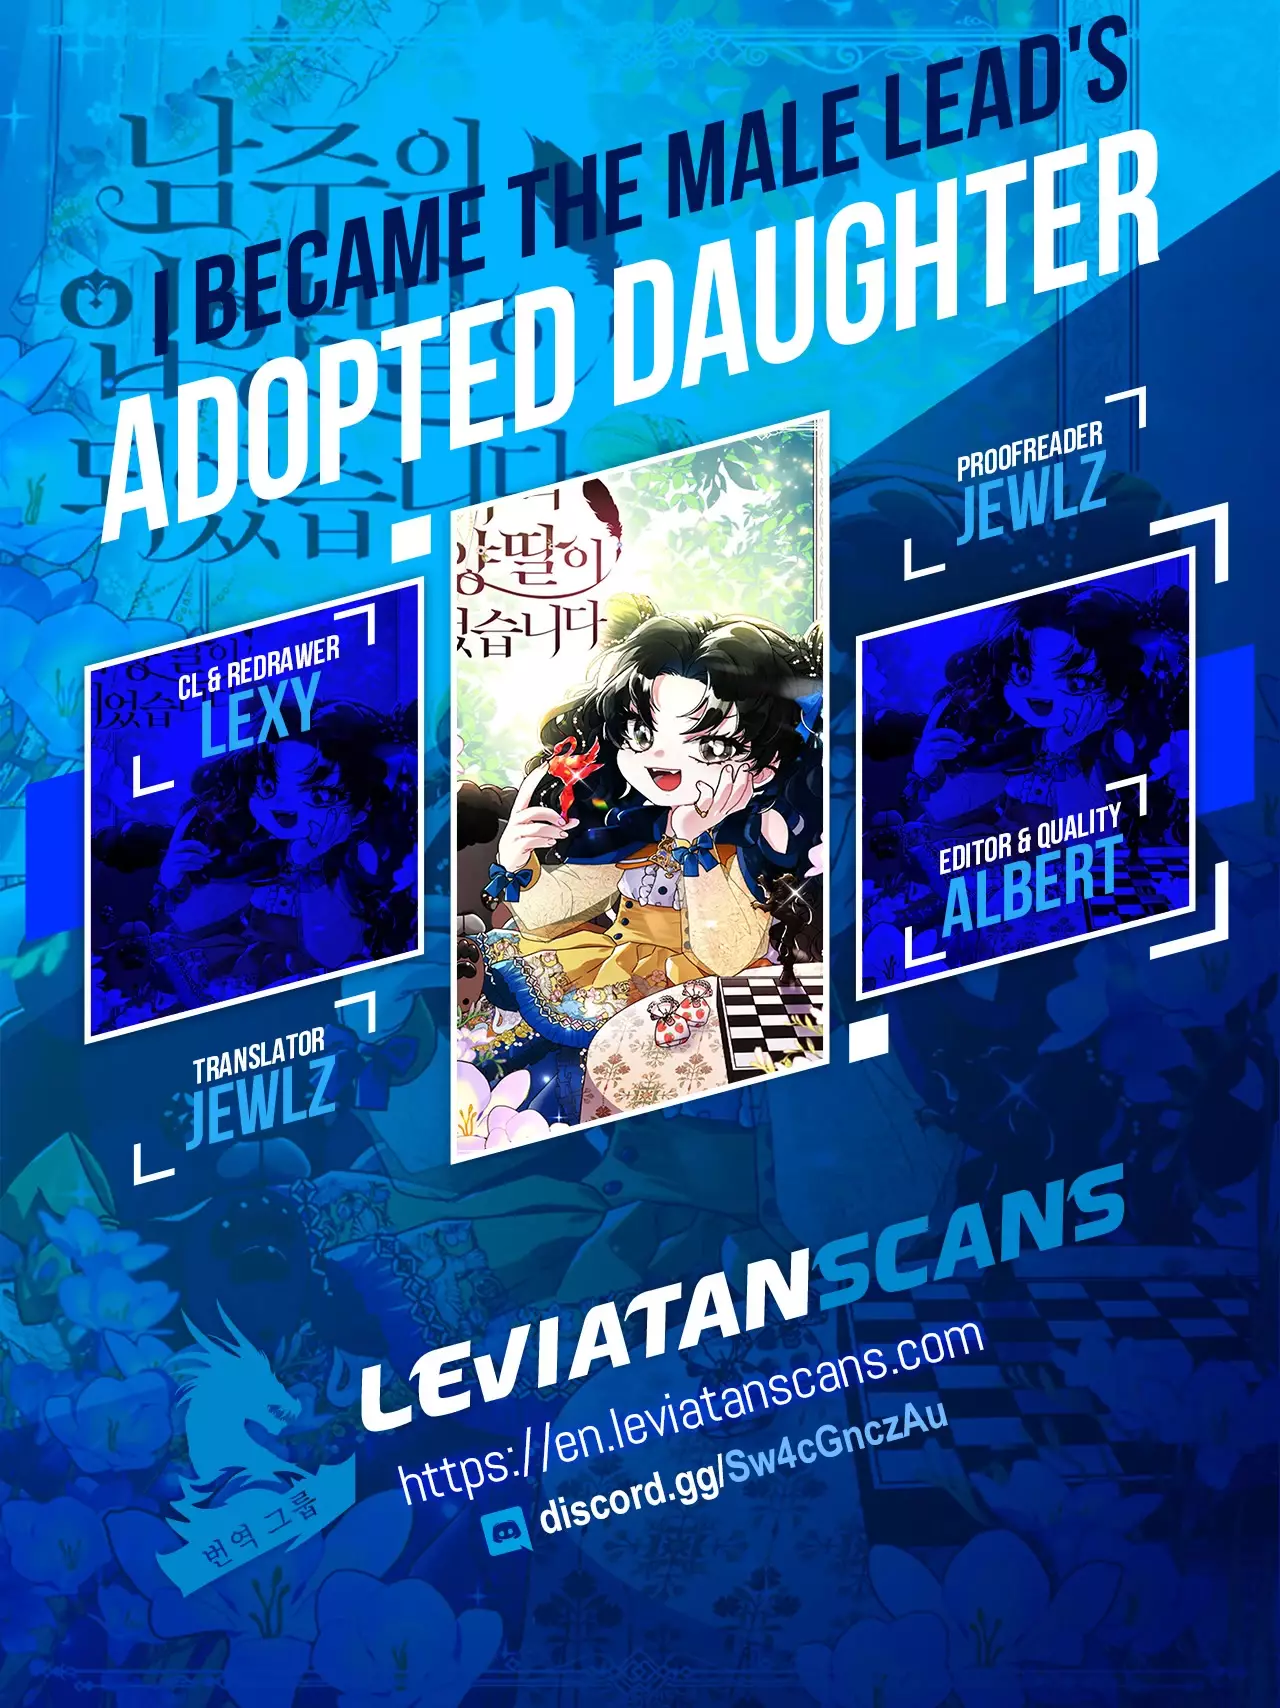 I Became The Male Lead’S Adopted Daughter - 54 page 1-5043a0e9